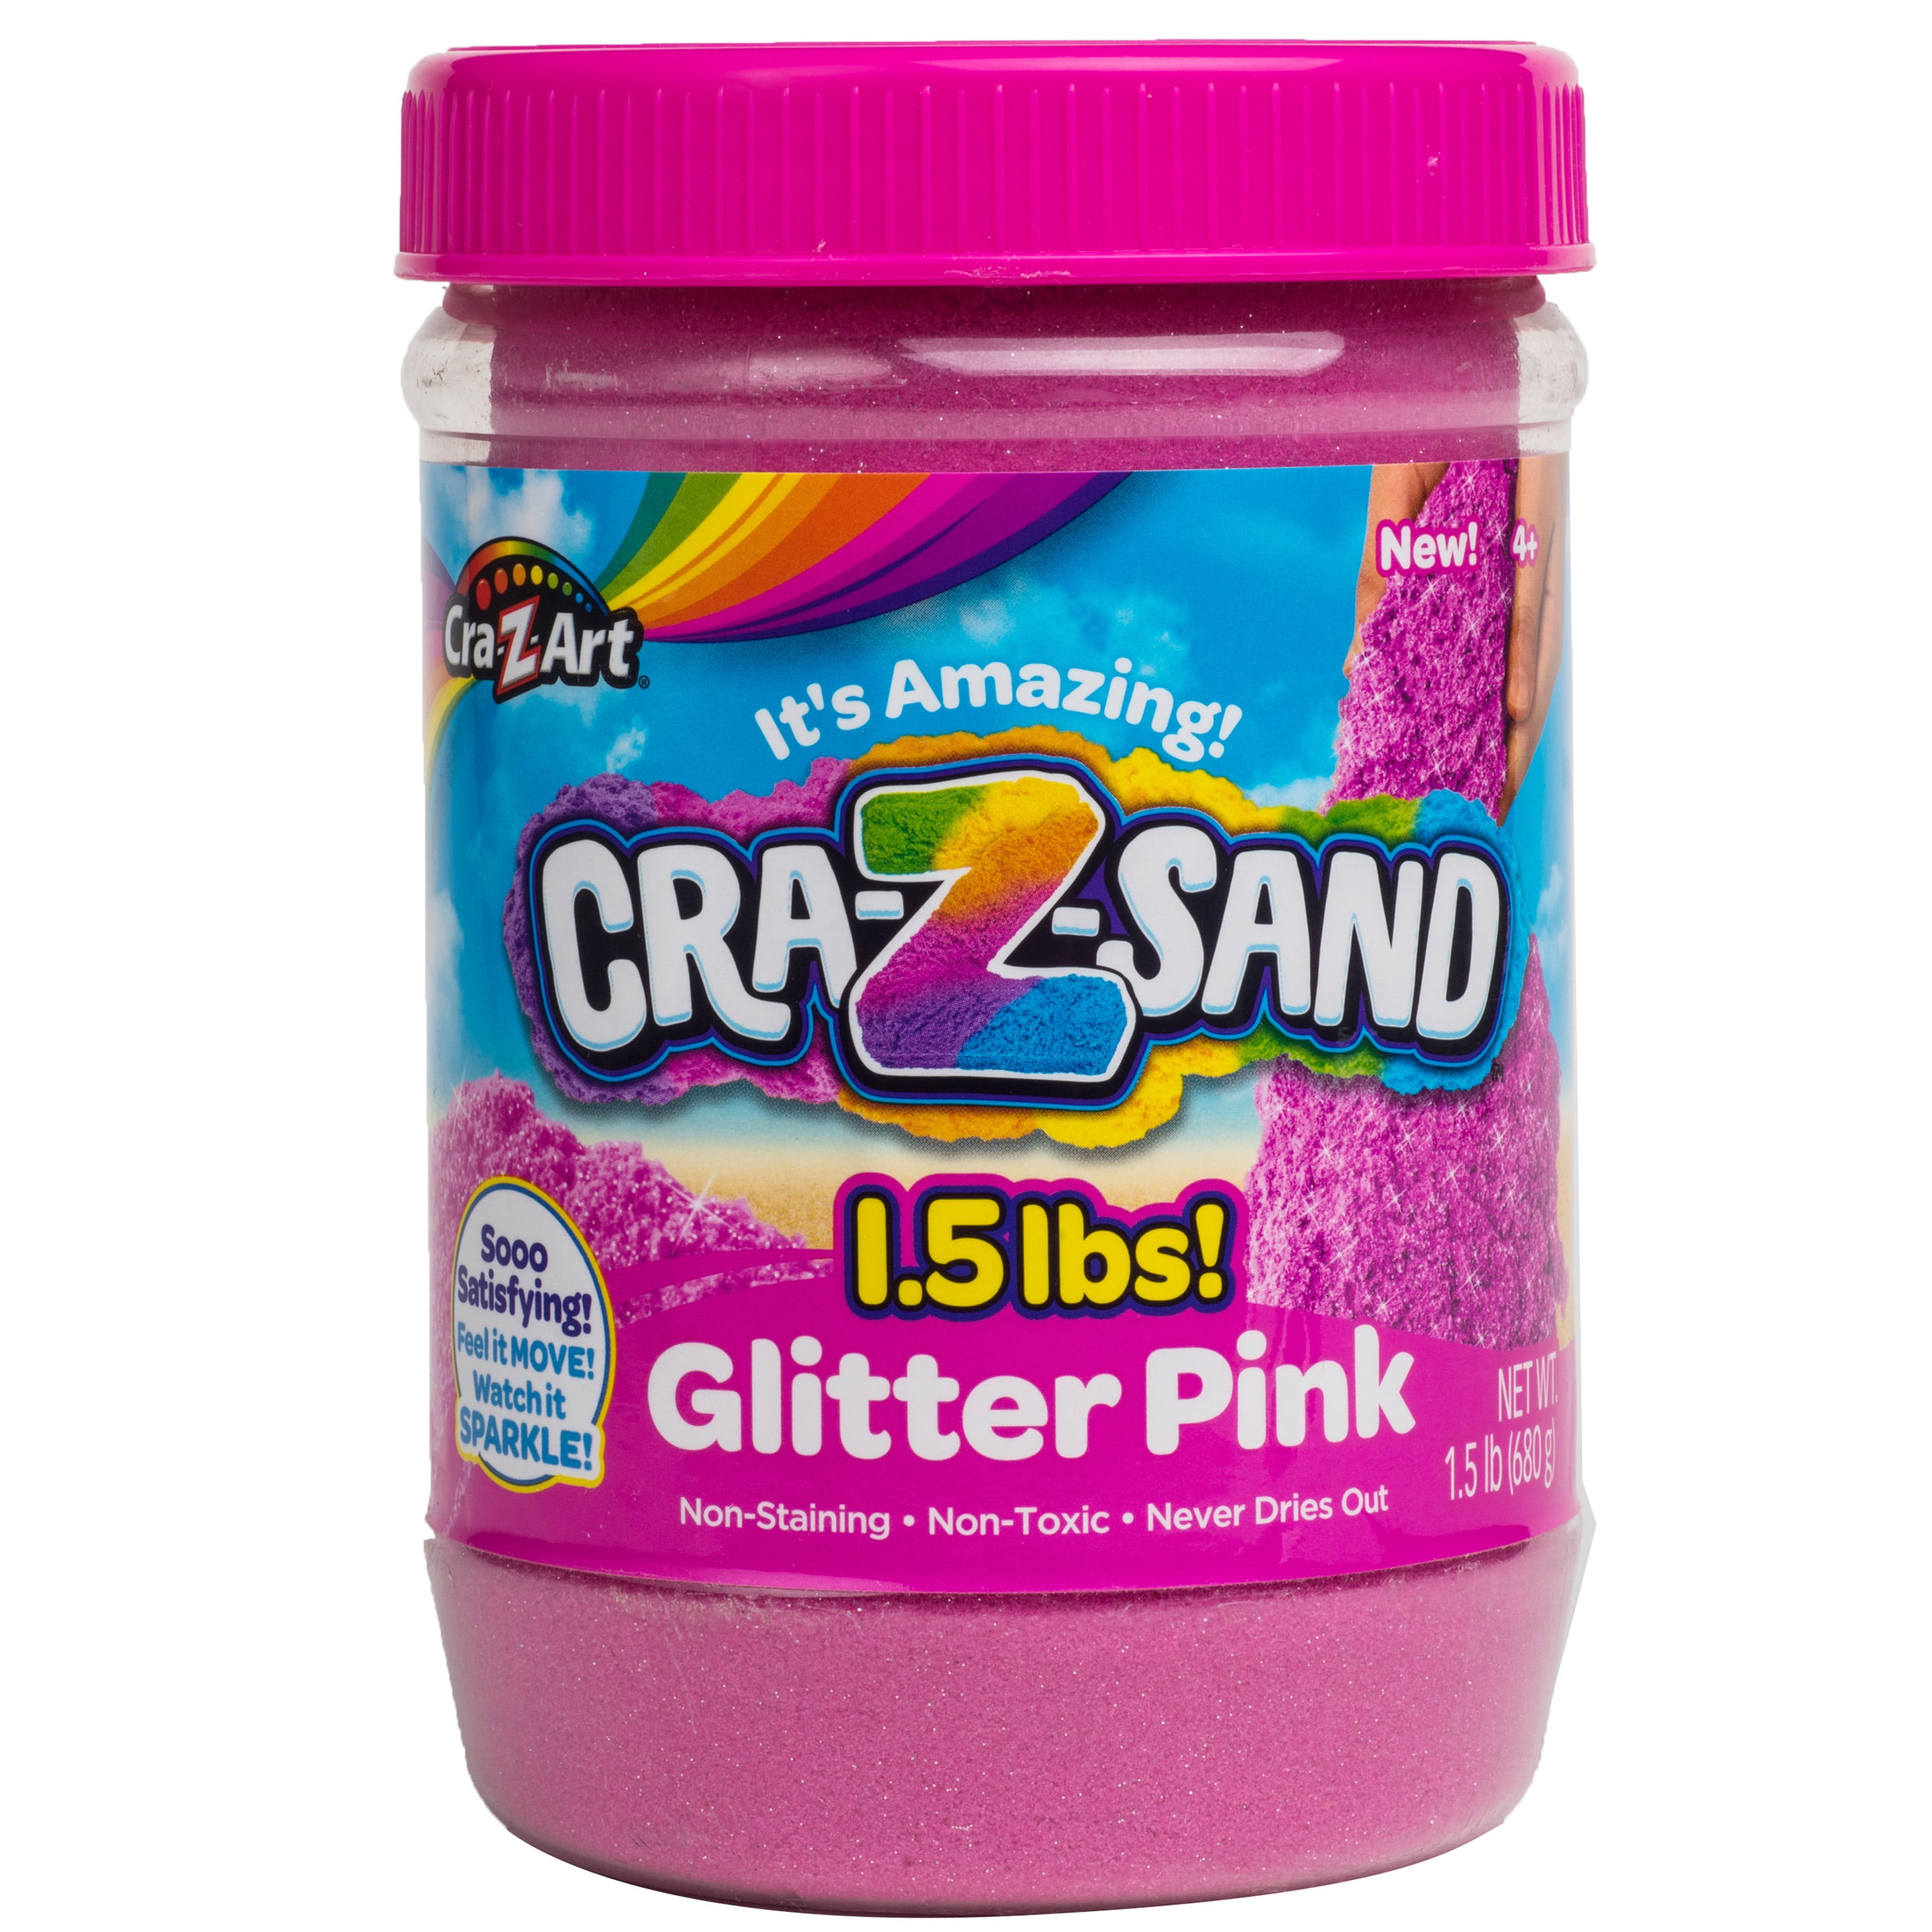 Cra-Z-Art Cra-Z-Sand Glitter Pink Sand 1.5lbs Jar, Unisex Child Ages 4 and up